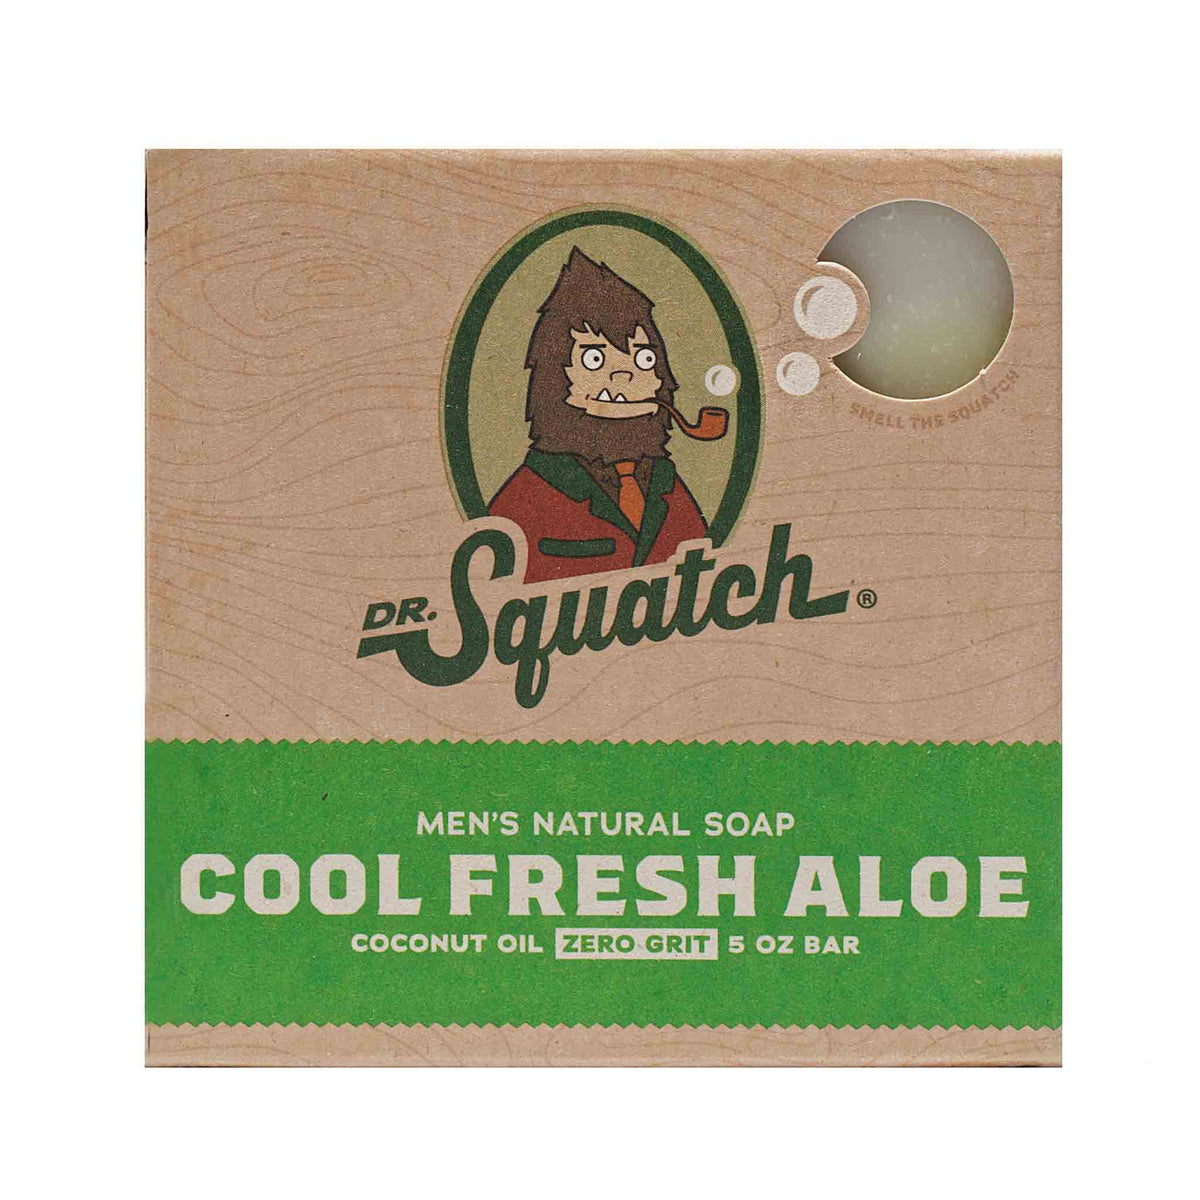 Dr. Squatch - Stay cool and celebrate 10 years of Squatch with this fresh  version of Cool Fresh Aloe in a limited edition collector's box. This  restorative and soothing bar was first